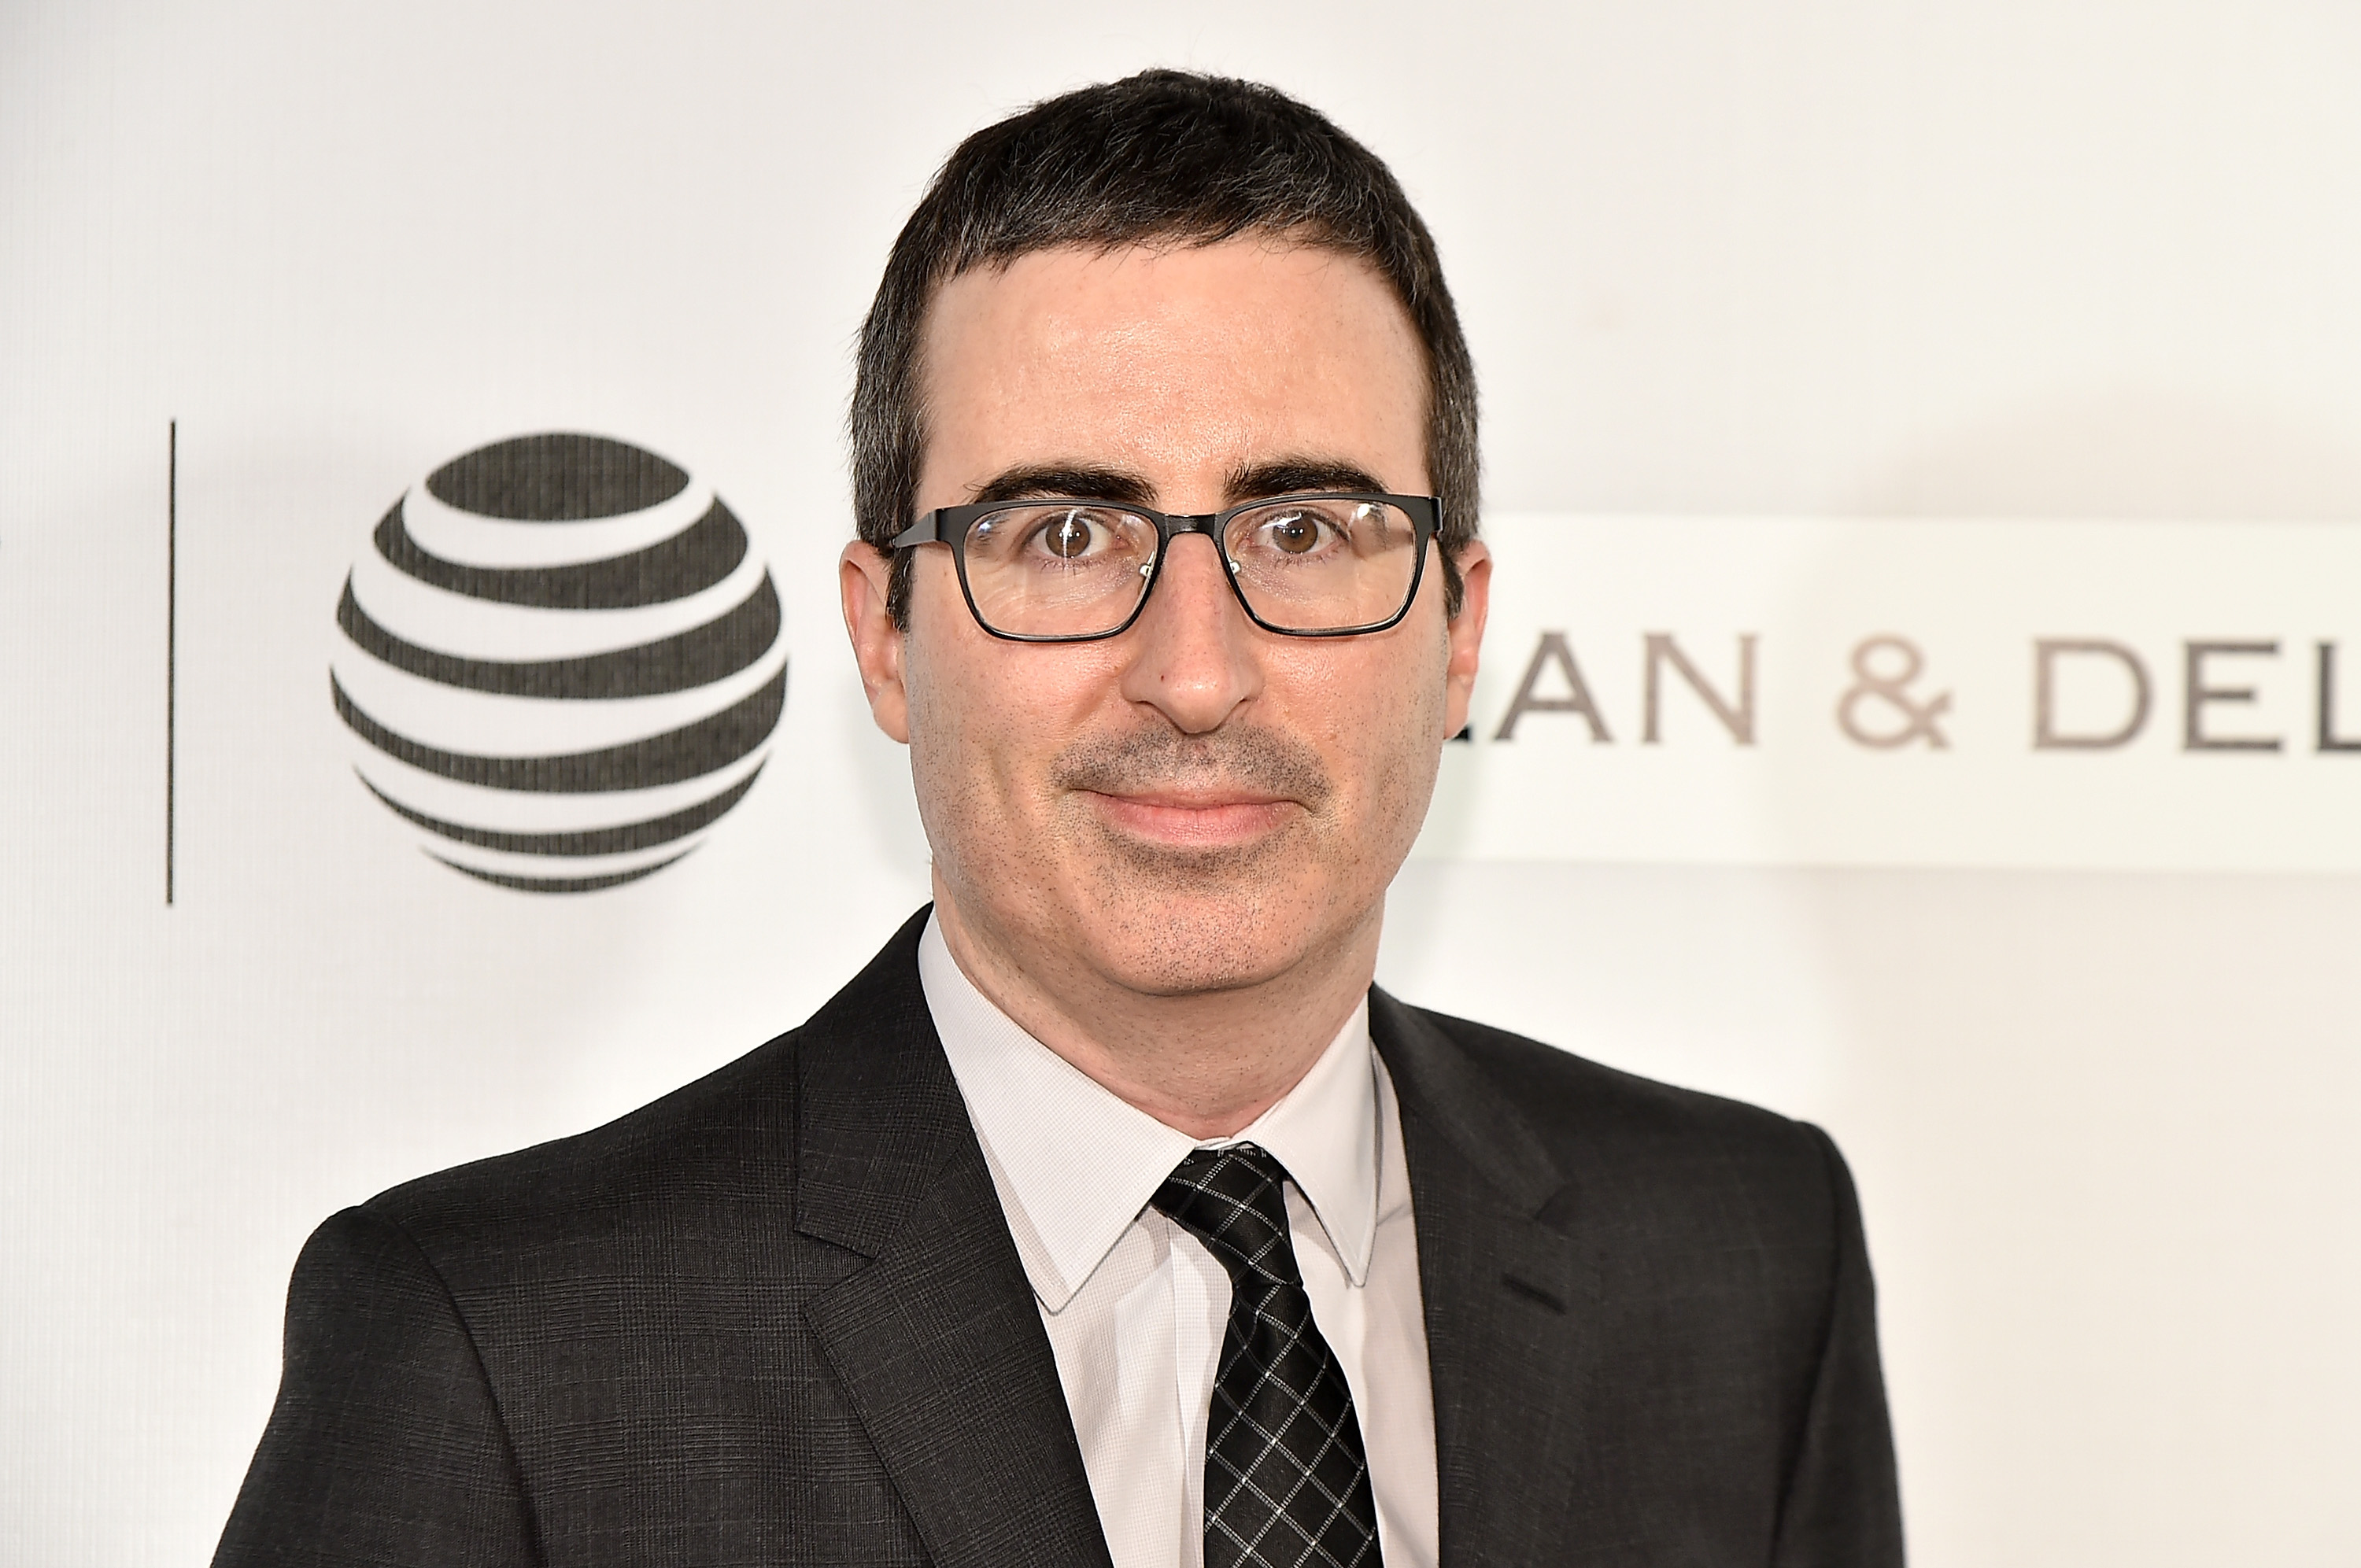 How To Make Your Debt Disappear Like John Oliver Did